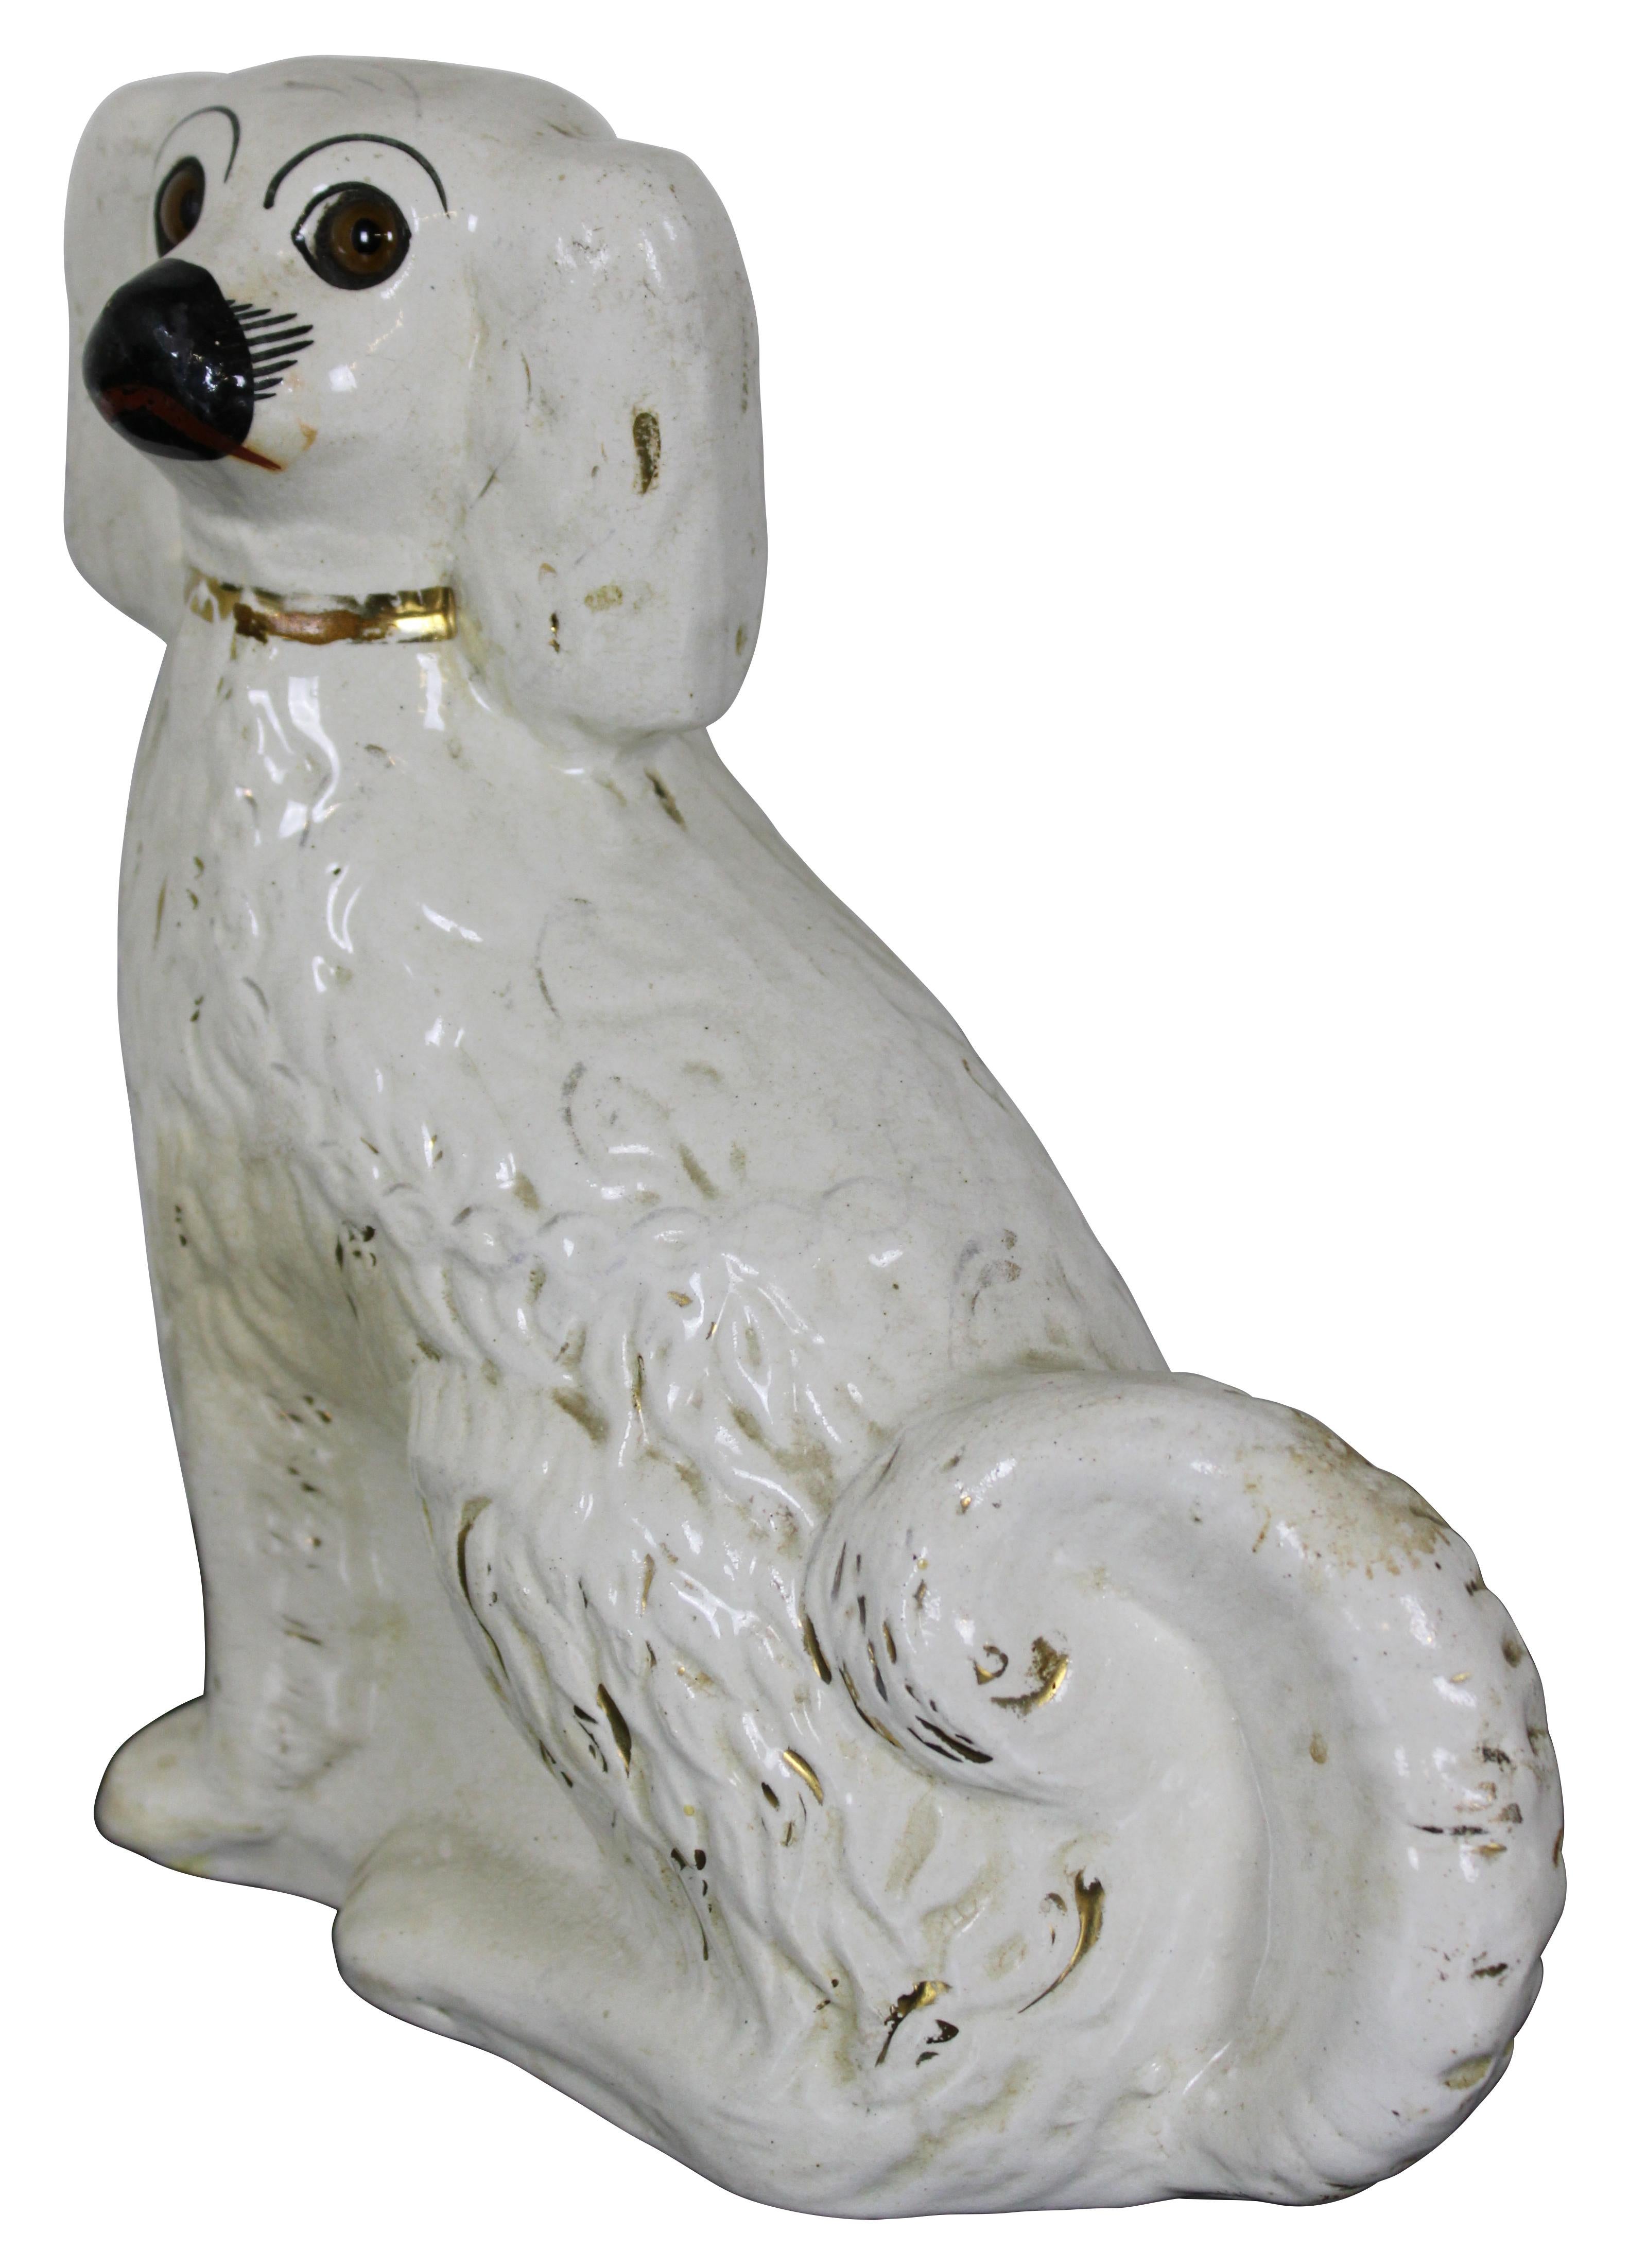 Antique Staffordshire porcelain figurine in the shape of a King Charles Spaniel with golden collar and brown glass eyes. Measure: 9